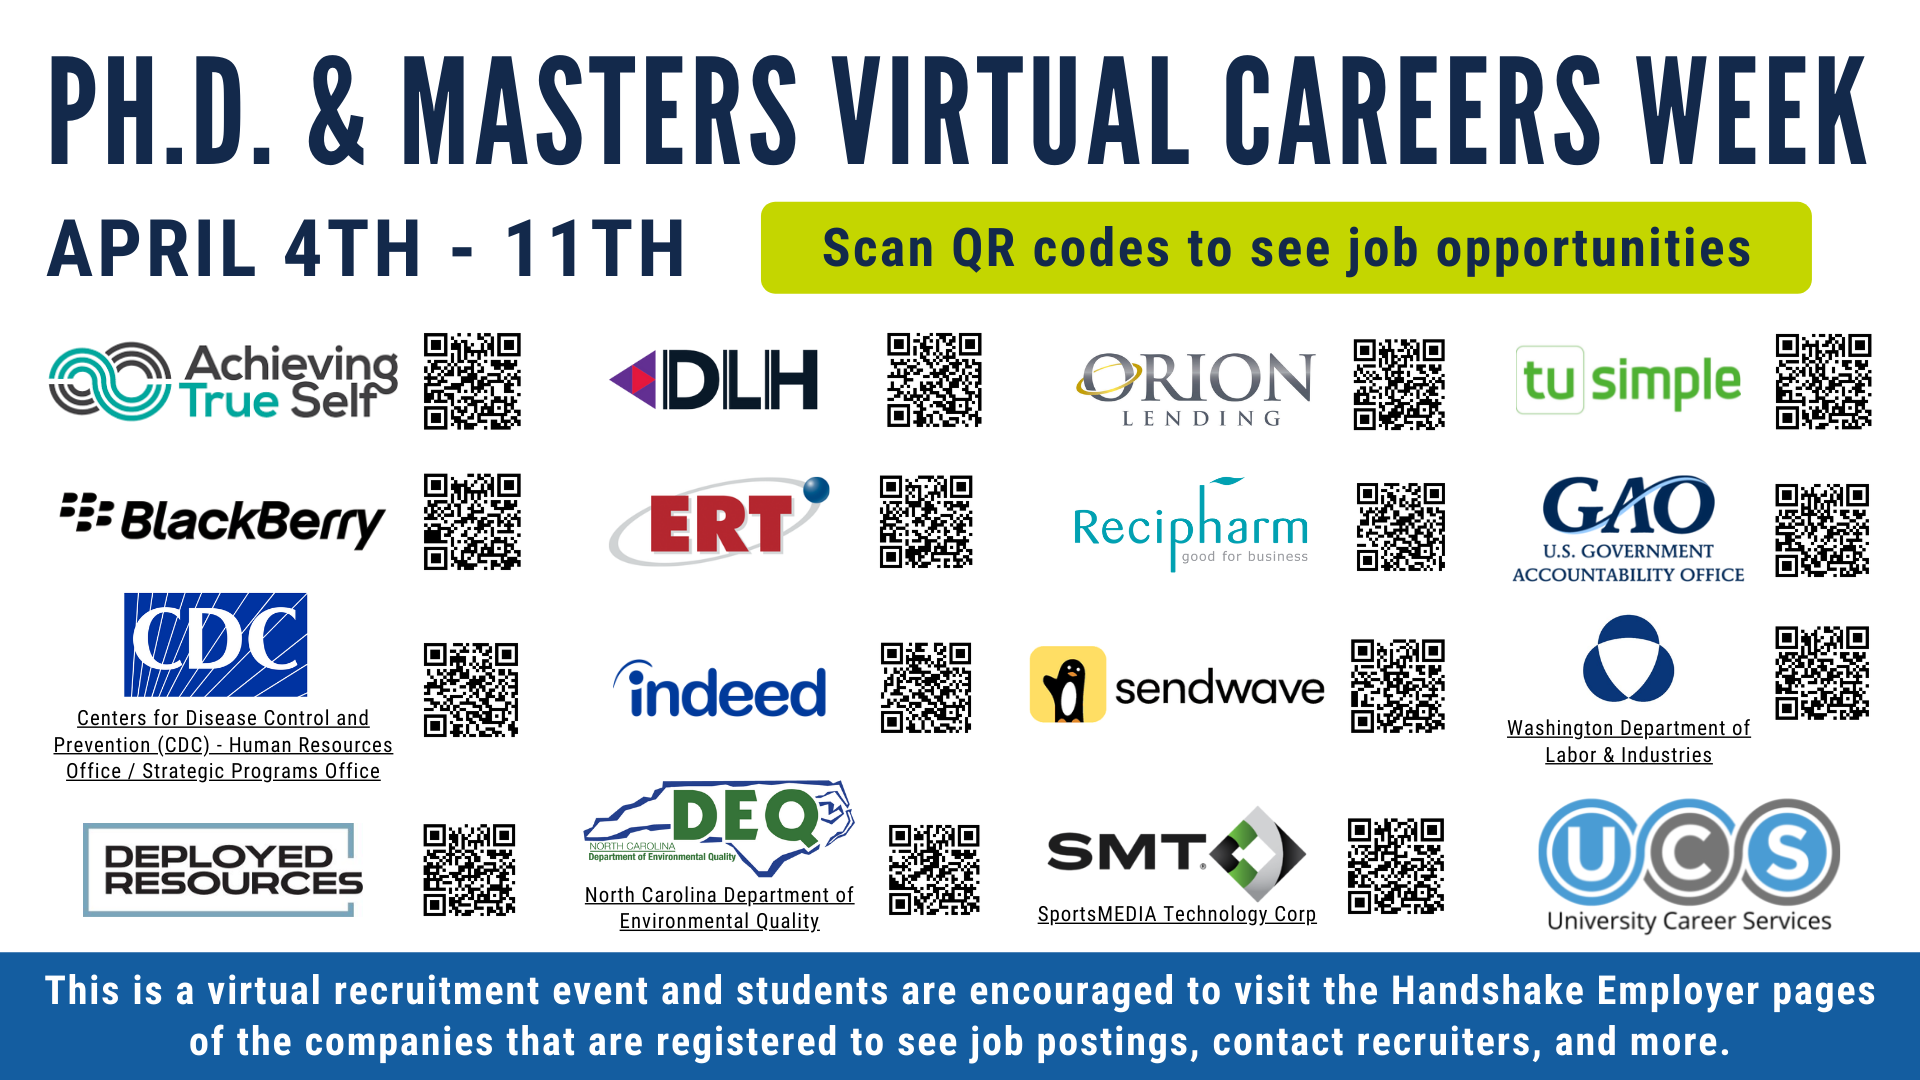 This is a virtual recruitment event and students are encouraged to visit the Handshake Employer pages of the companies that are registered to see job postings, contact recruiters, and more.